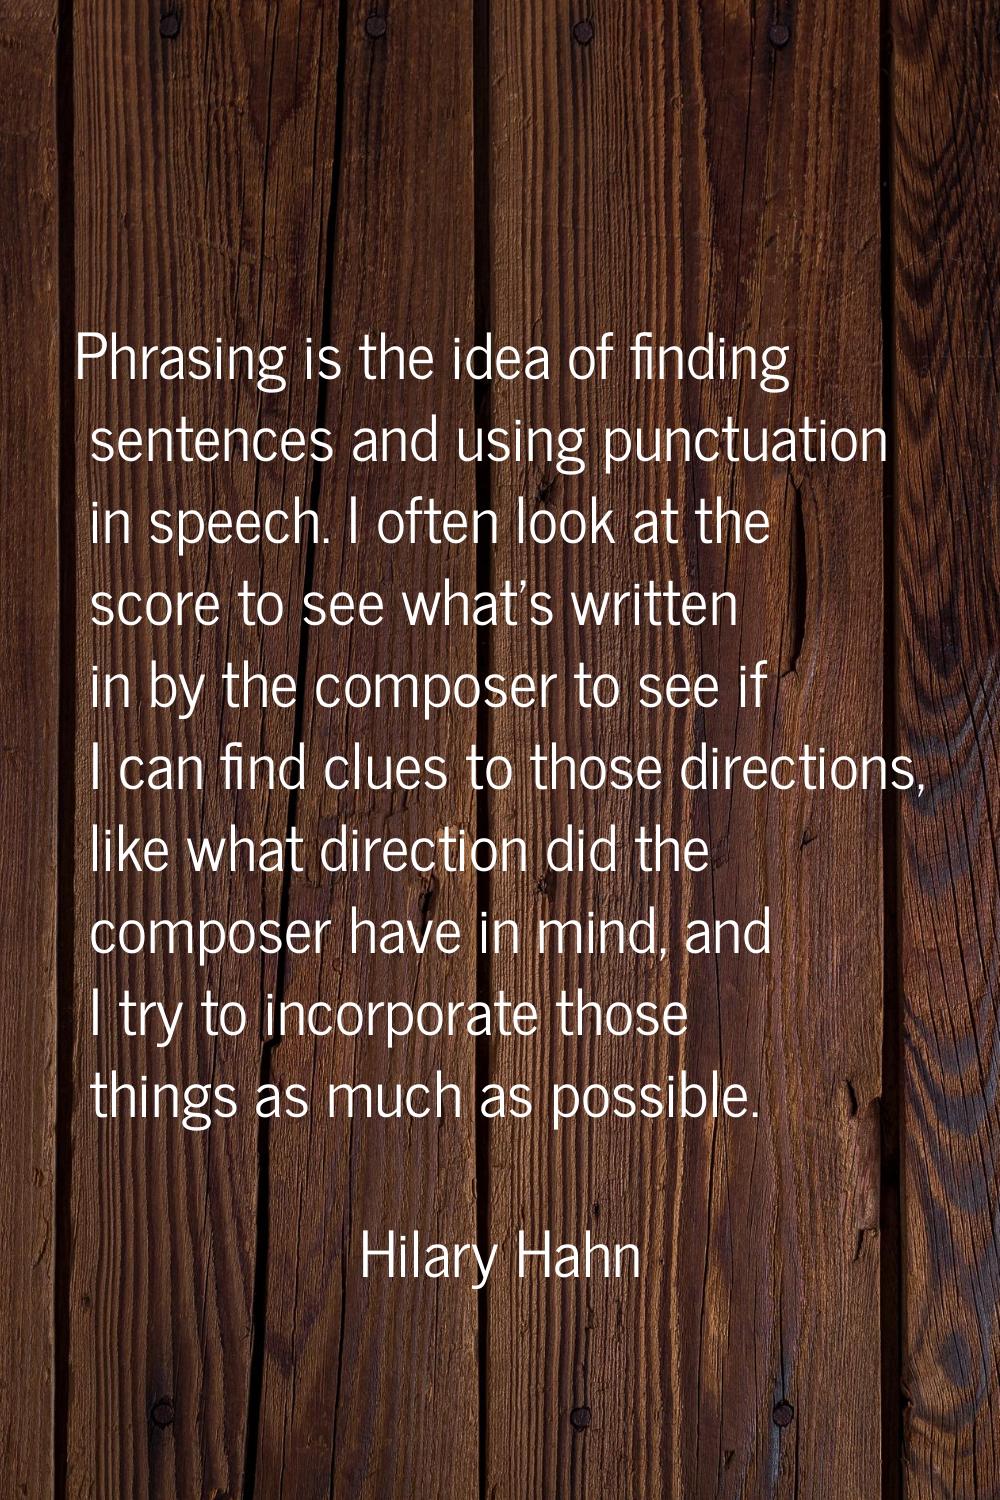 Phrasing is the idea of finding sentences and using punctuation in speech. I often look at the scor